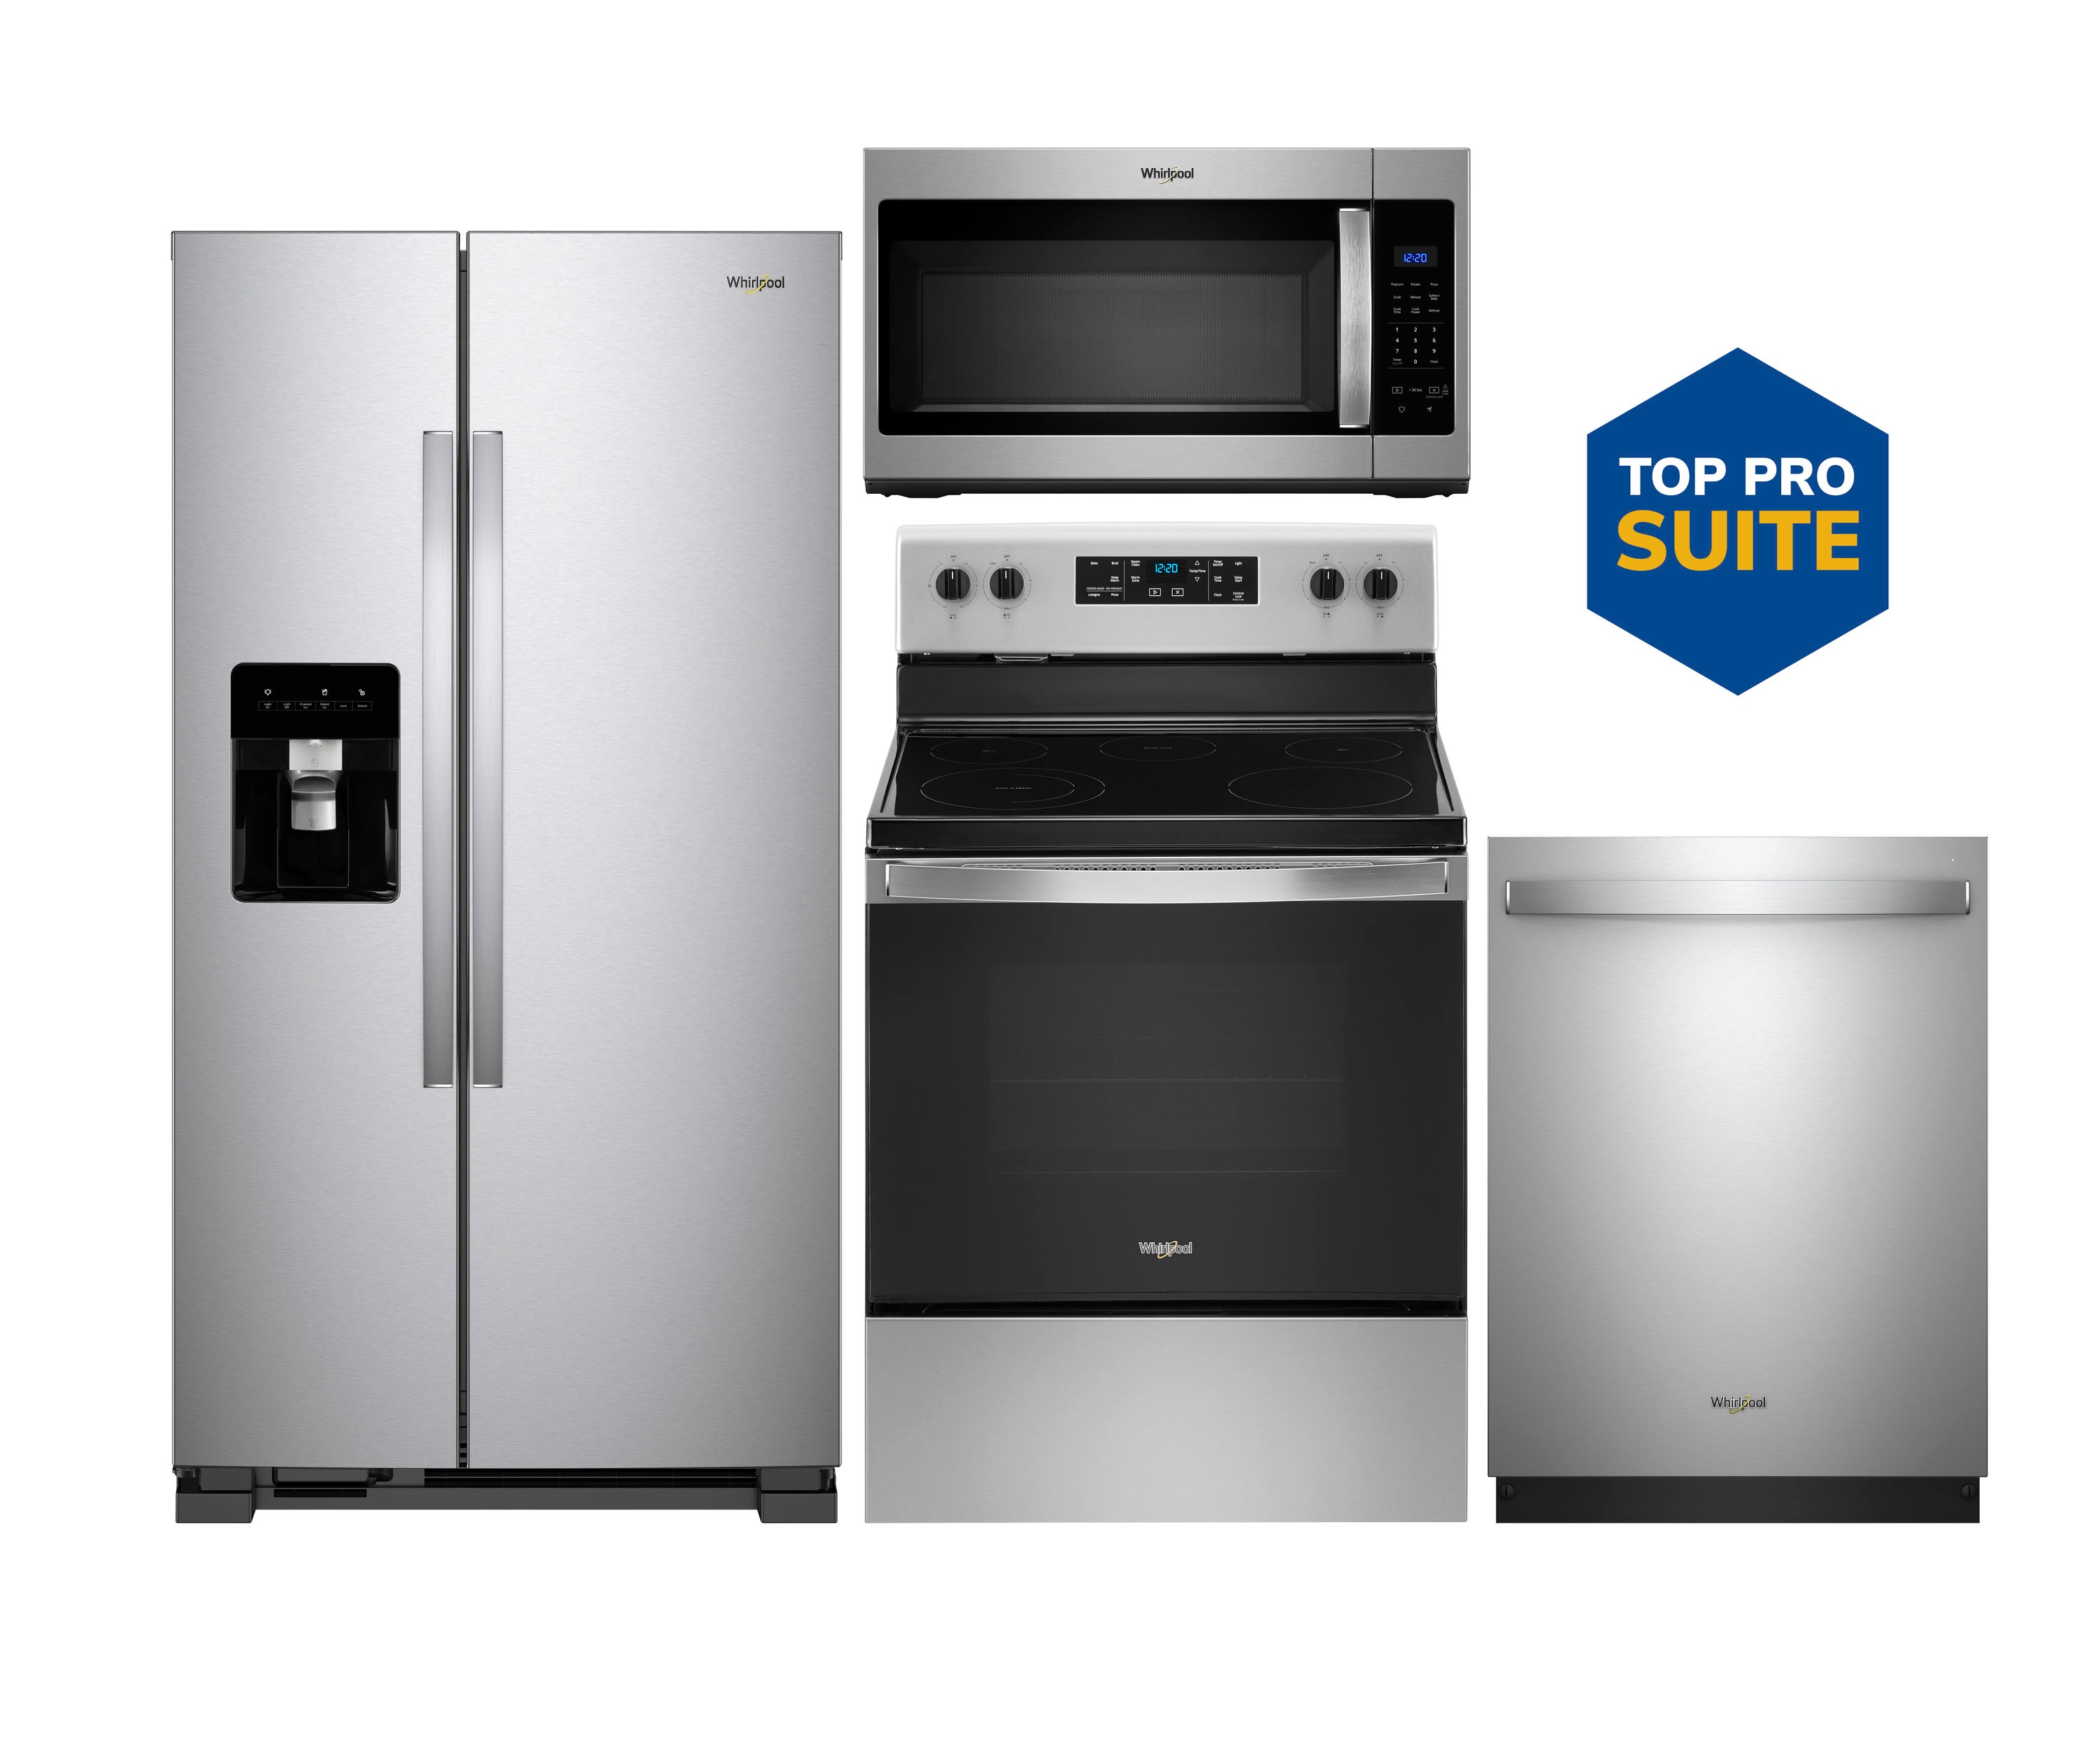 whirlpool stainless steel appliances